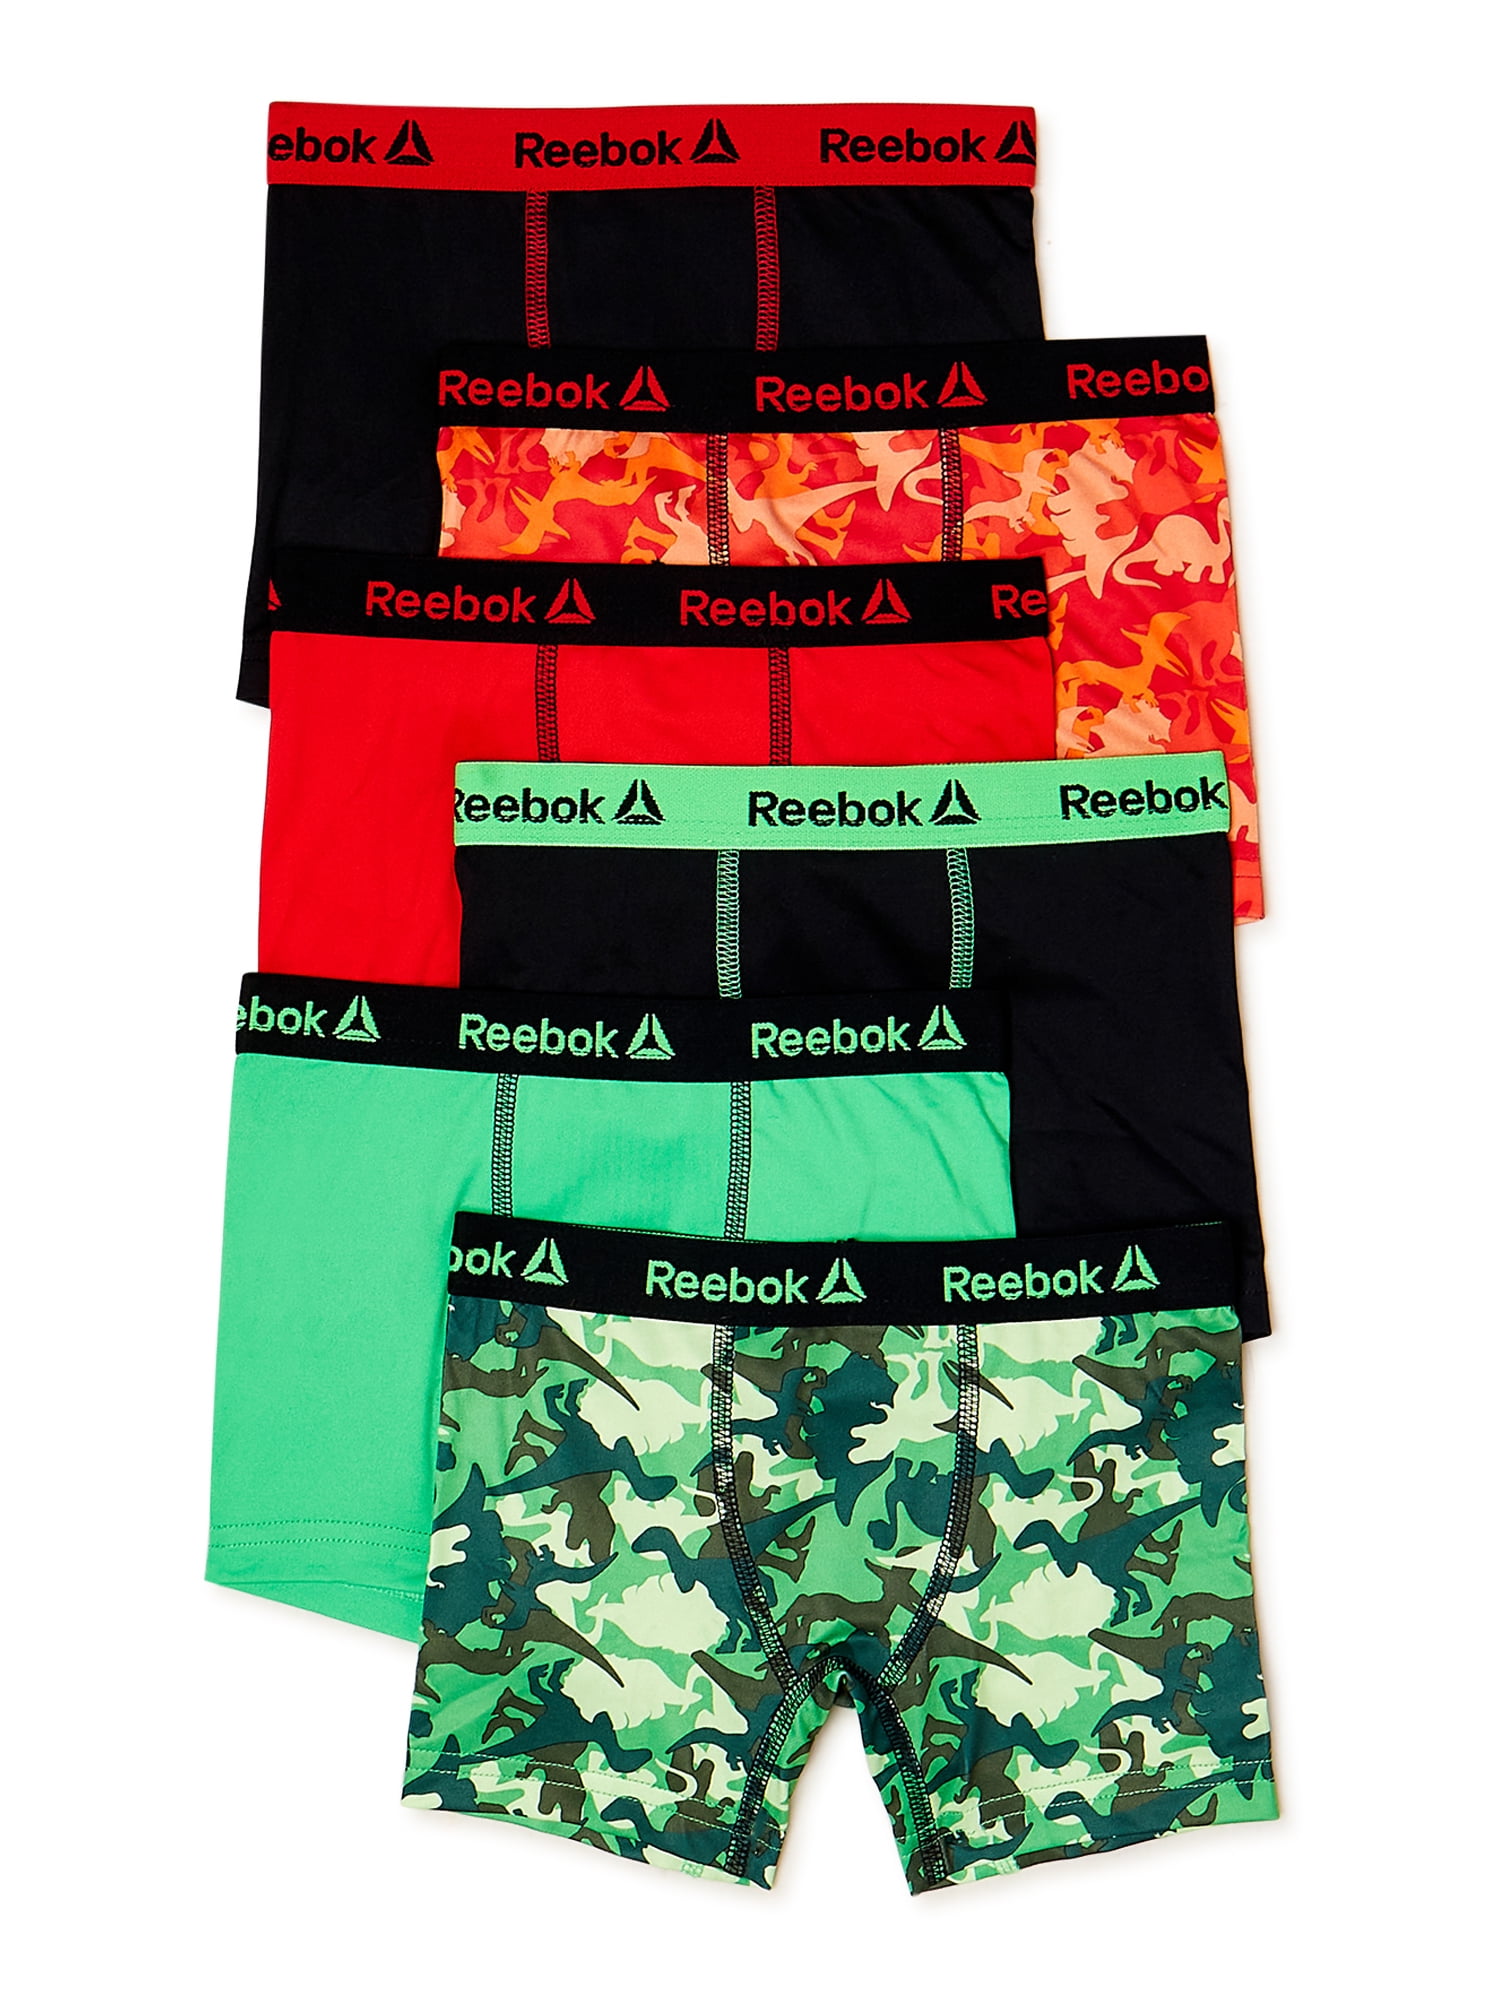 Reebok Toddler Boys' Performance Boxer Briefs, 6-Pack, Sizes 2T-5T -